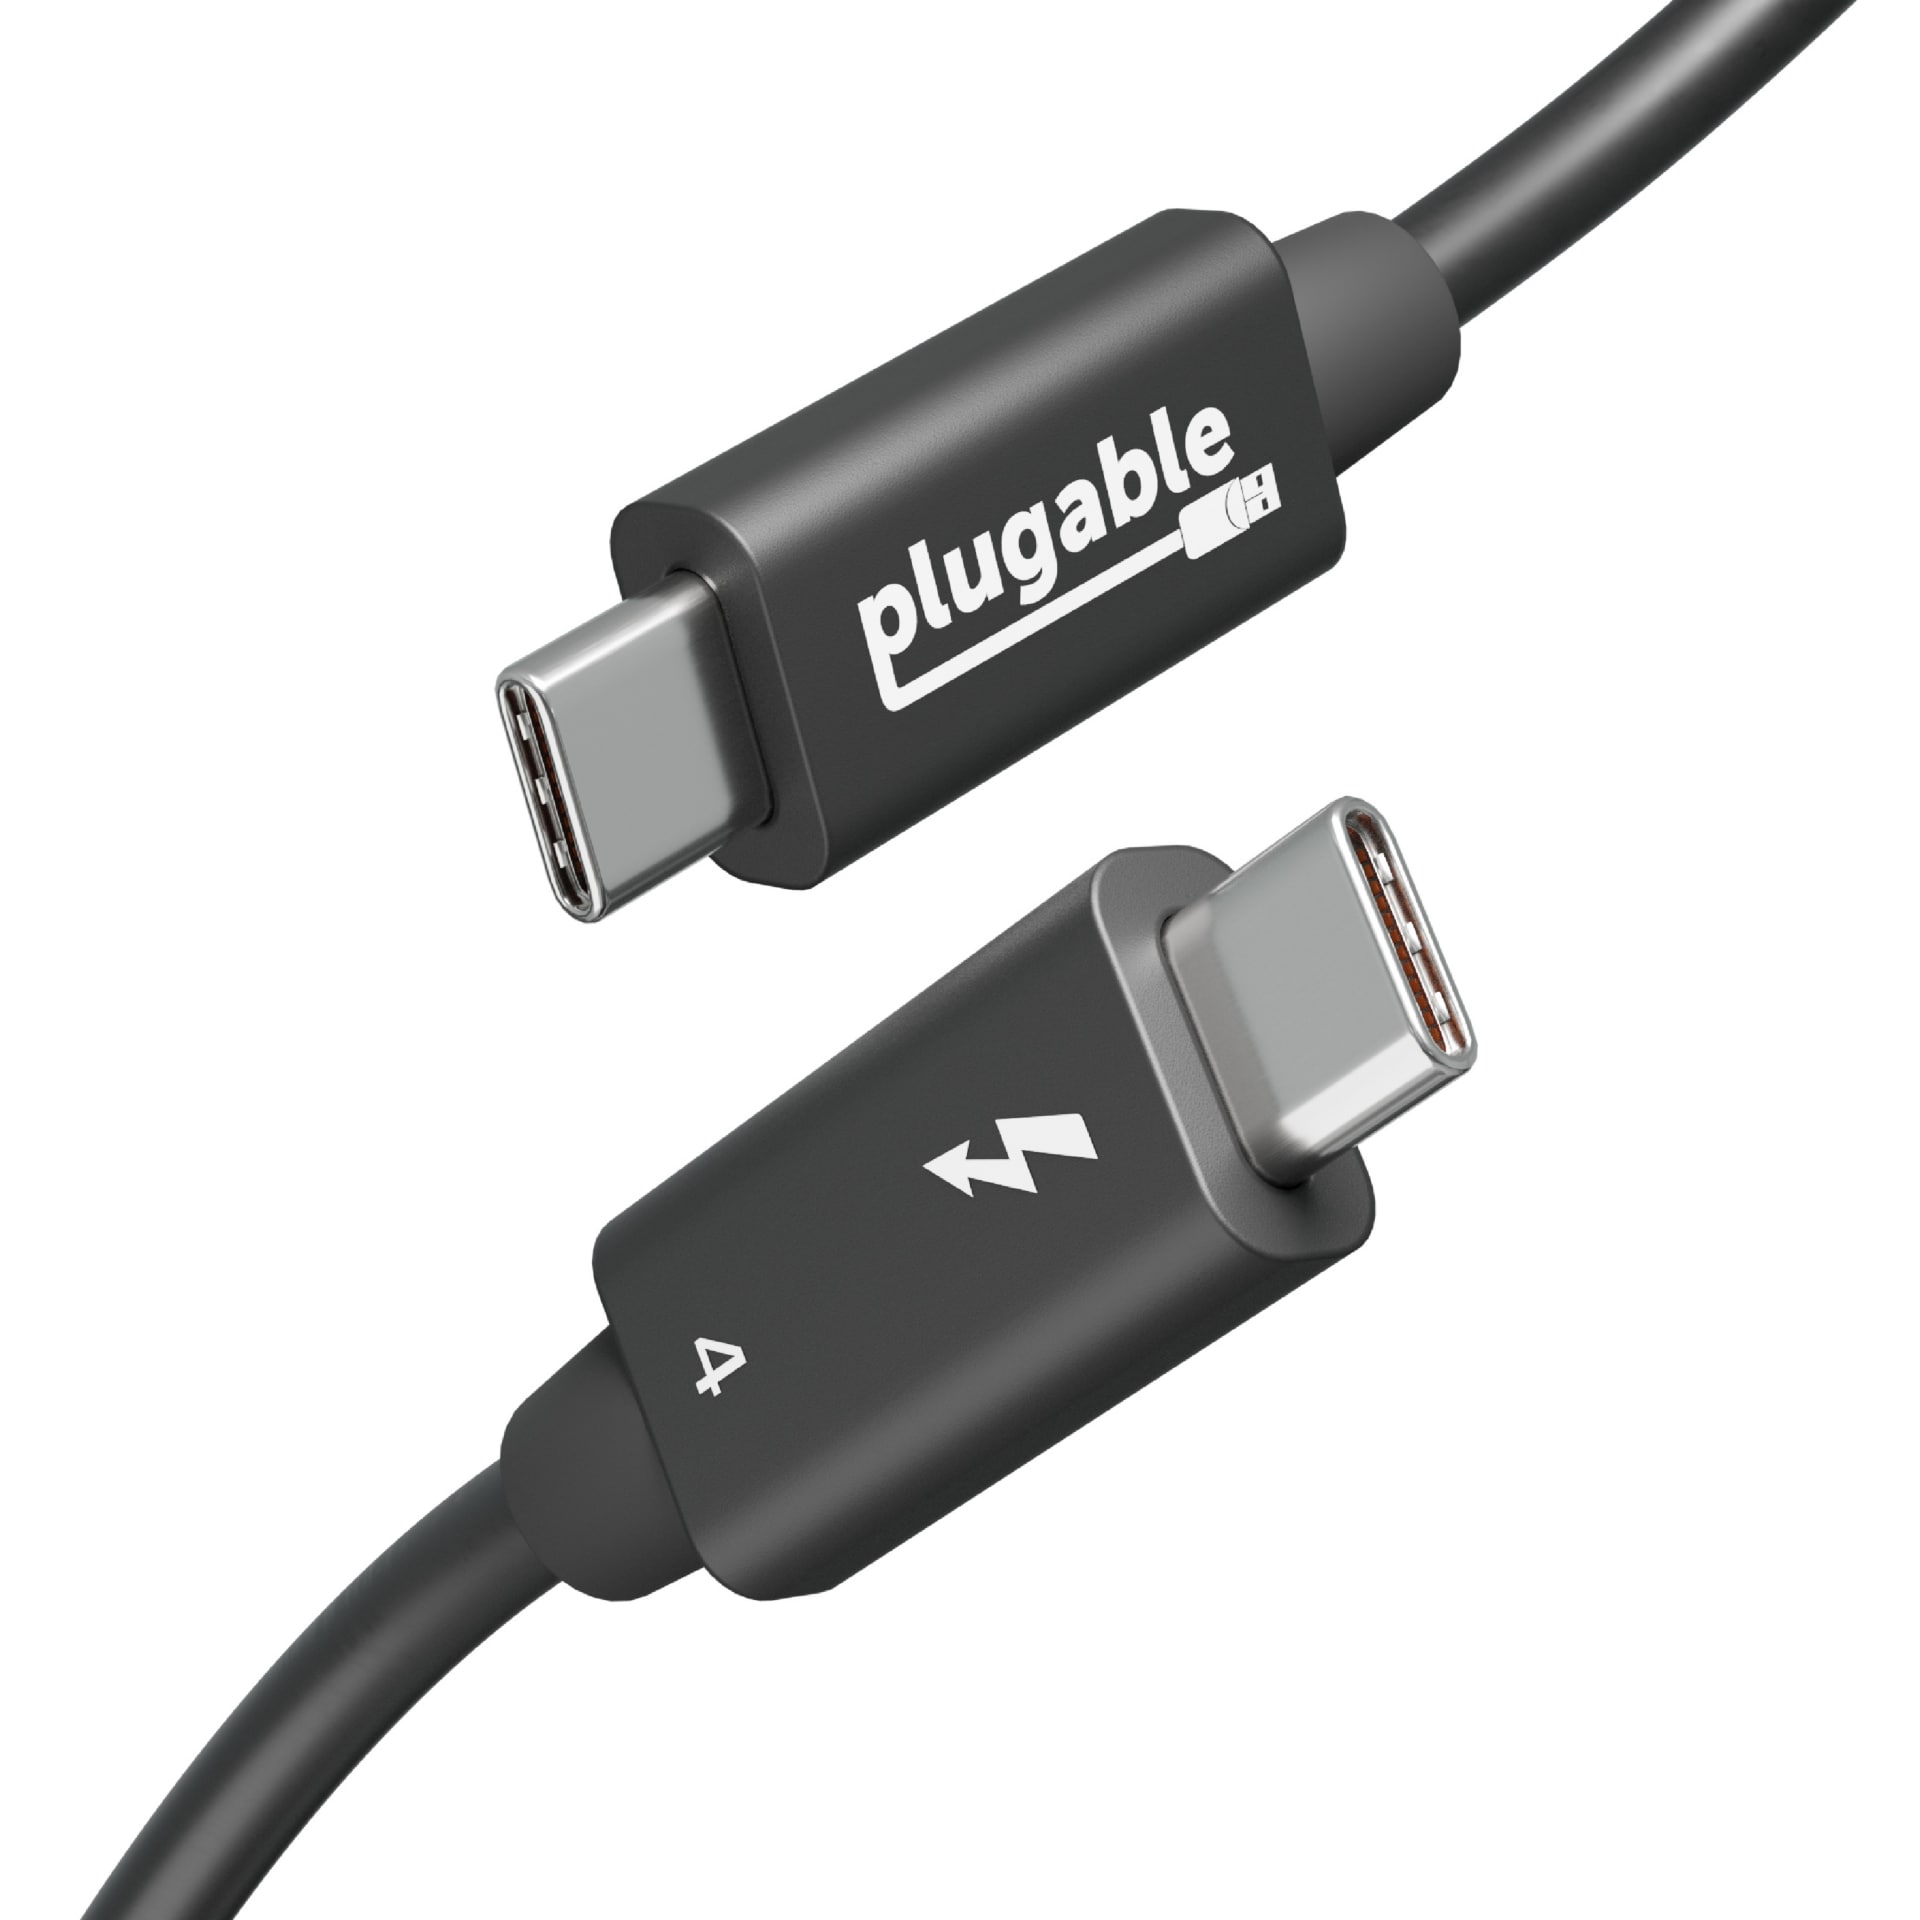 Plugable Thunderbolt 4 Cable w/ 240W Charging